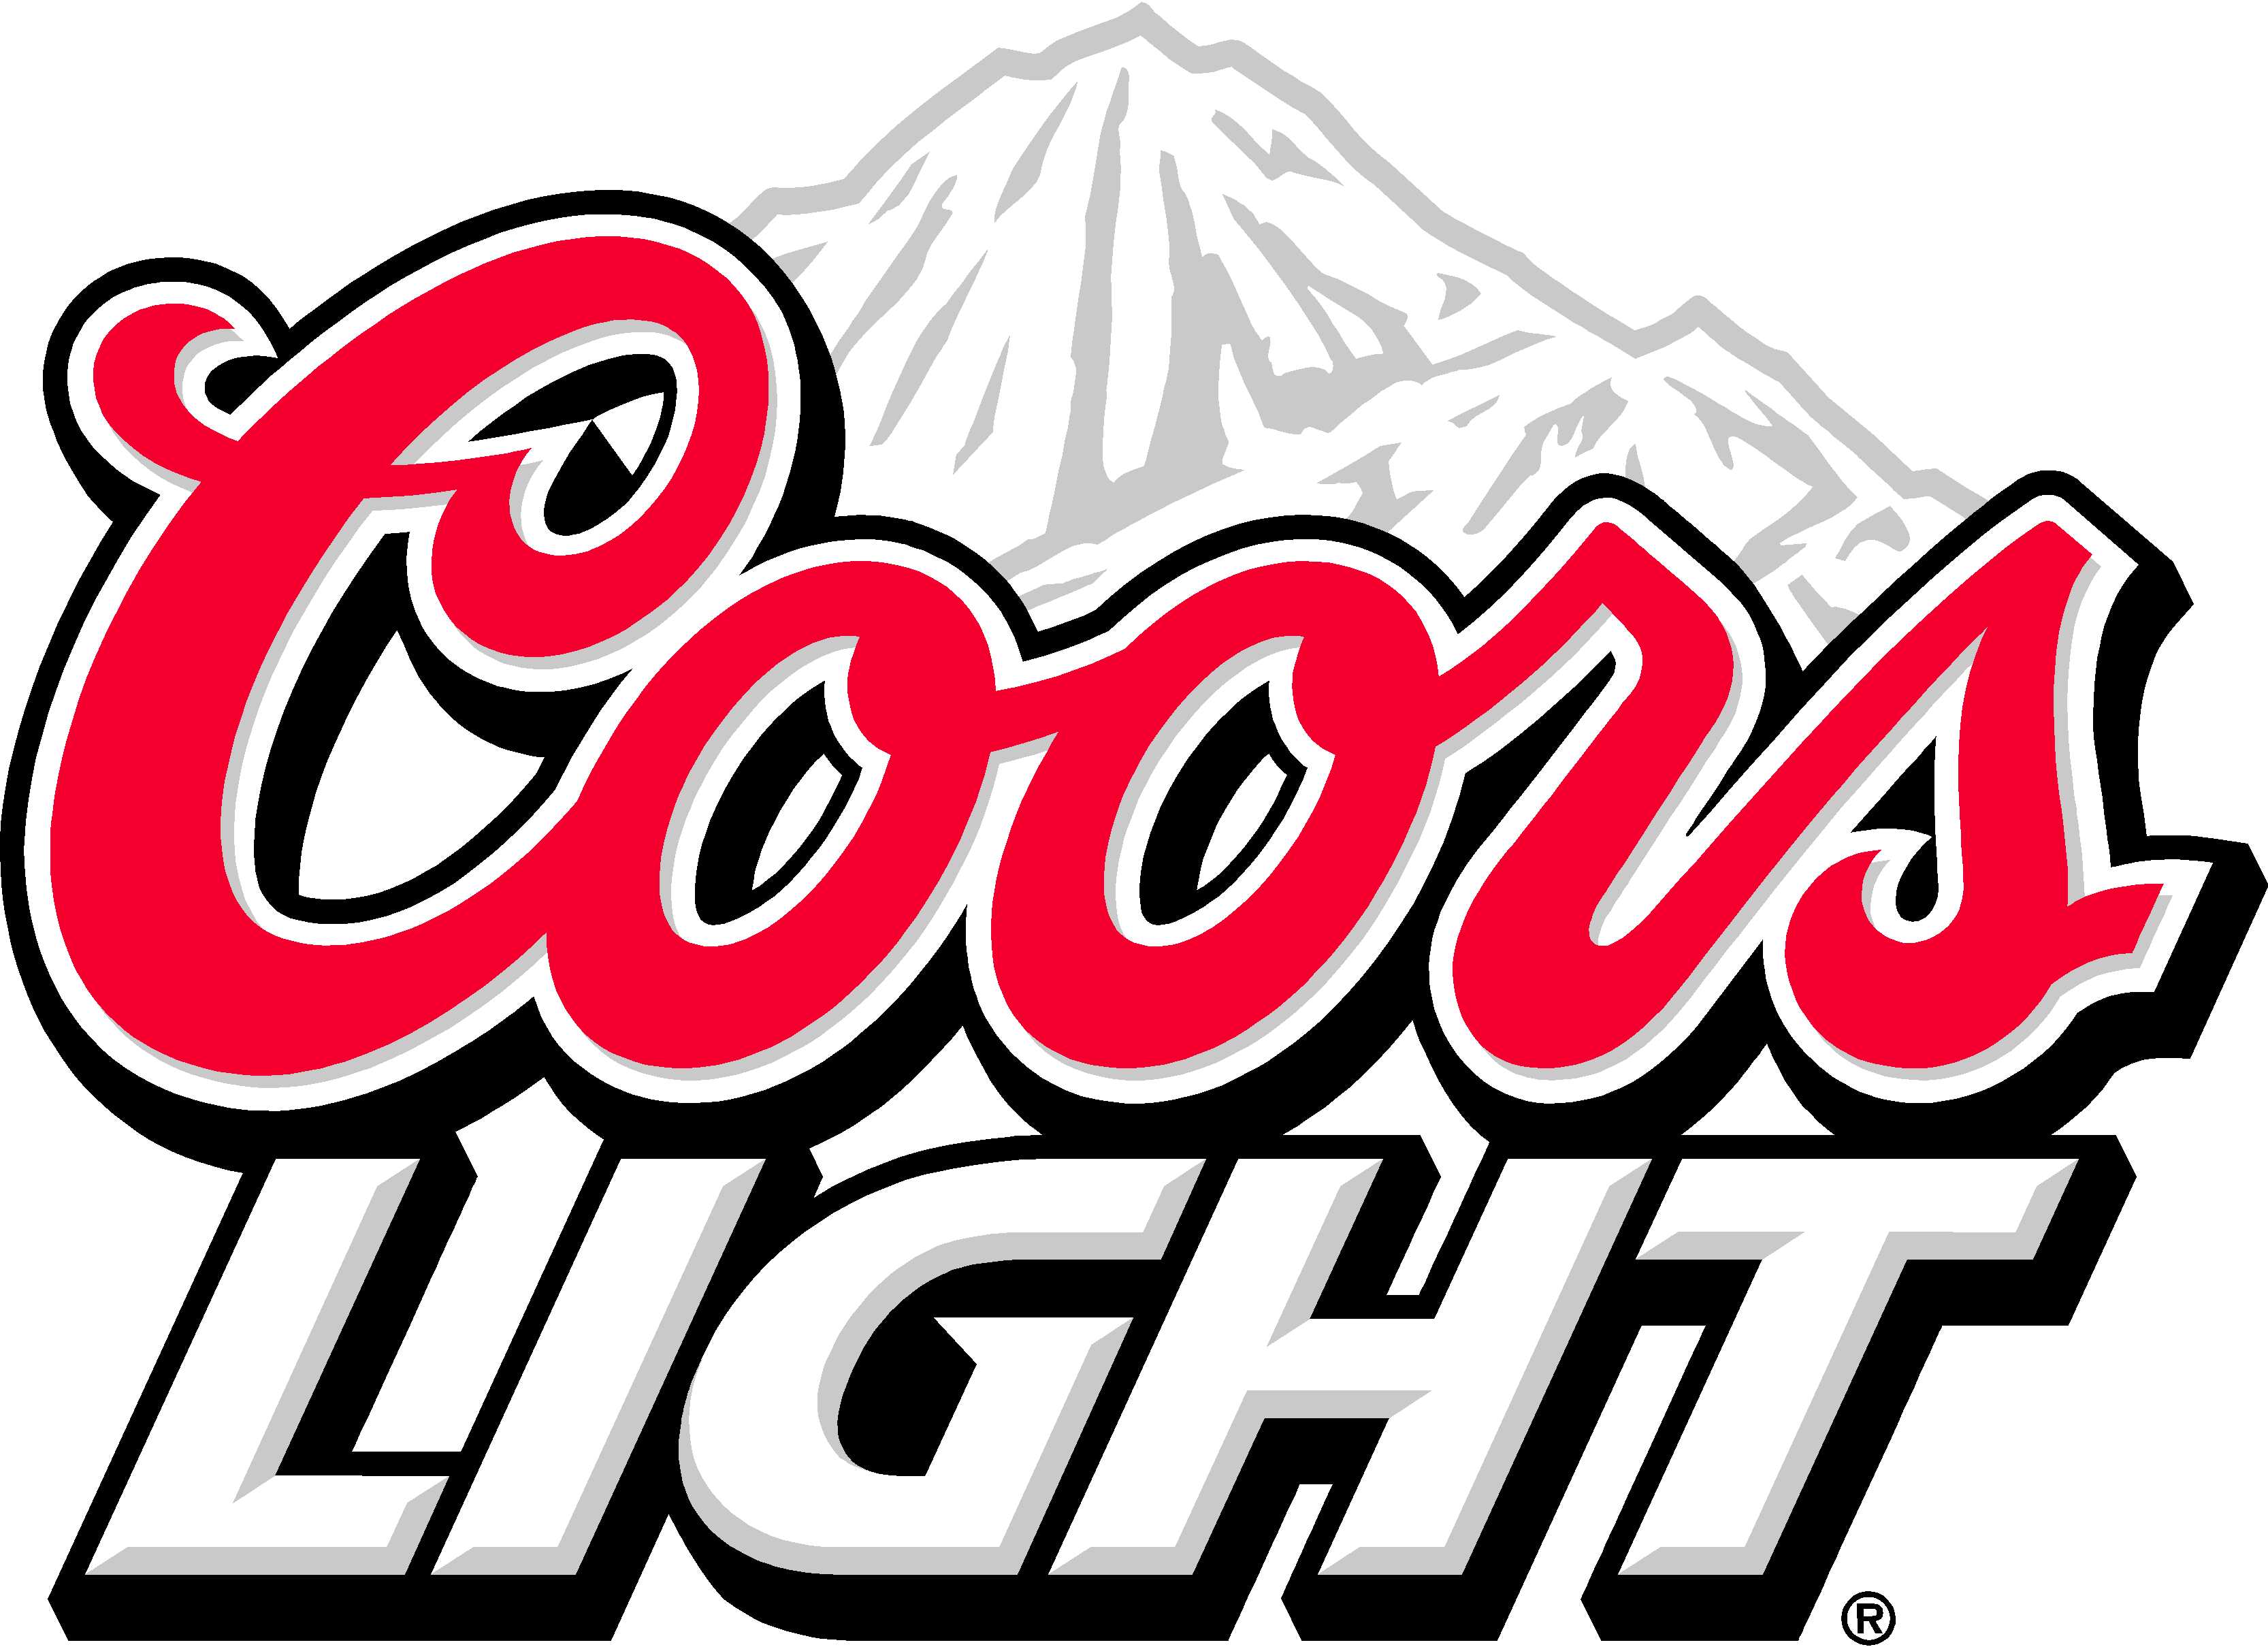 Cool Light Logo - MillerCoors Sued for Not Producing Coors Light in the Rockies. Tap